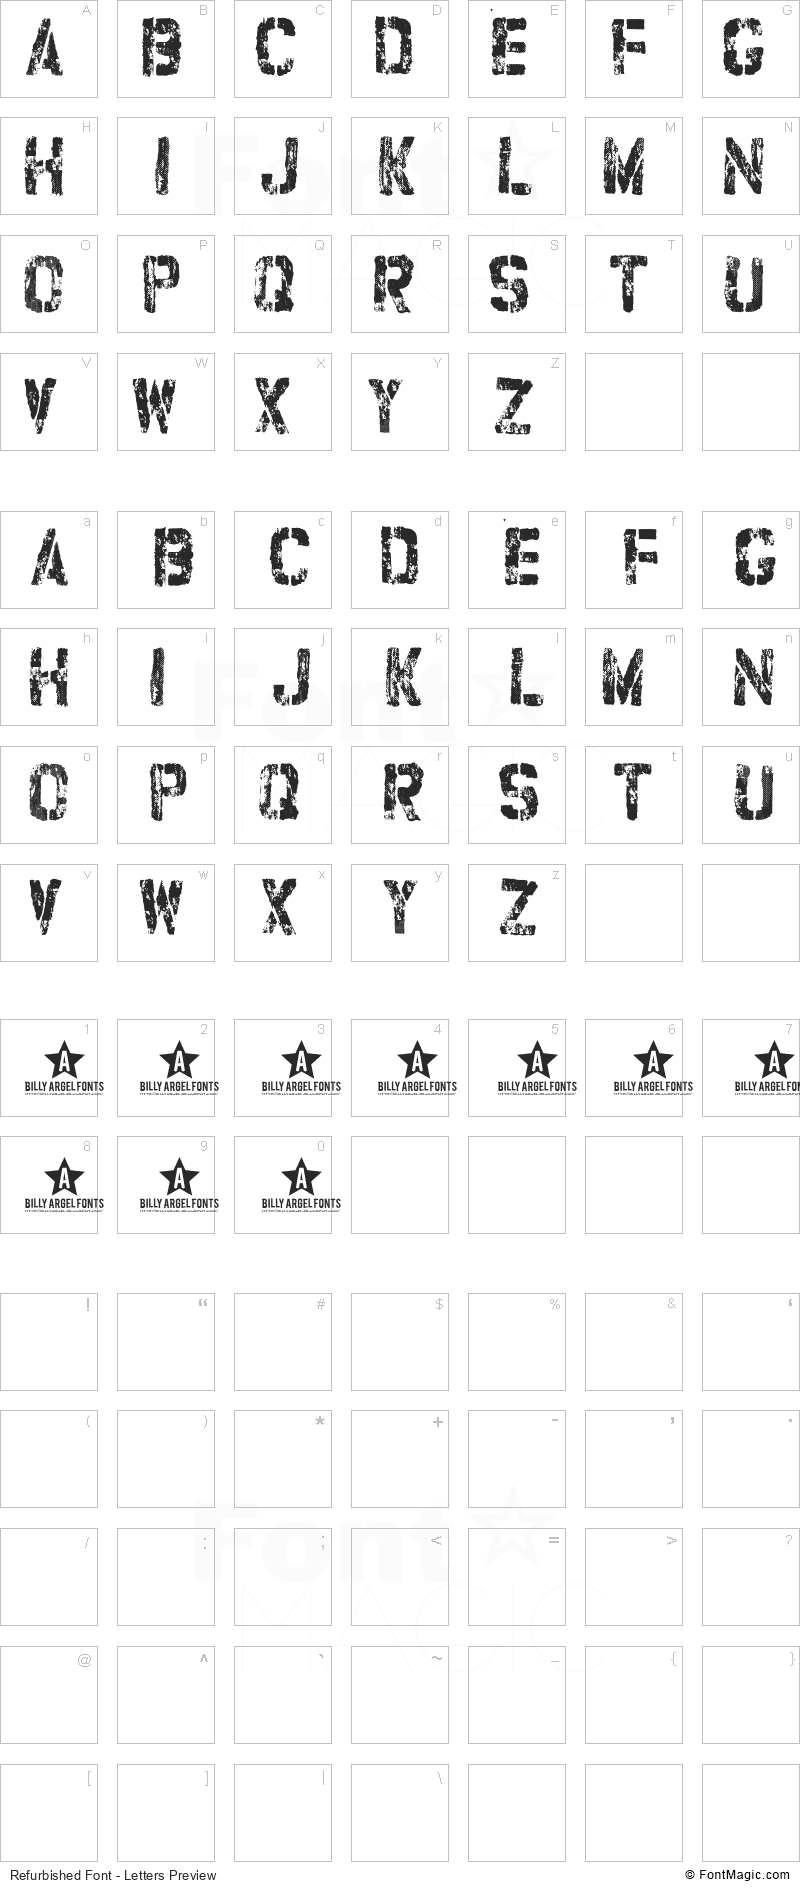 Refurbished Font - All Latters Preview Chart